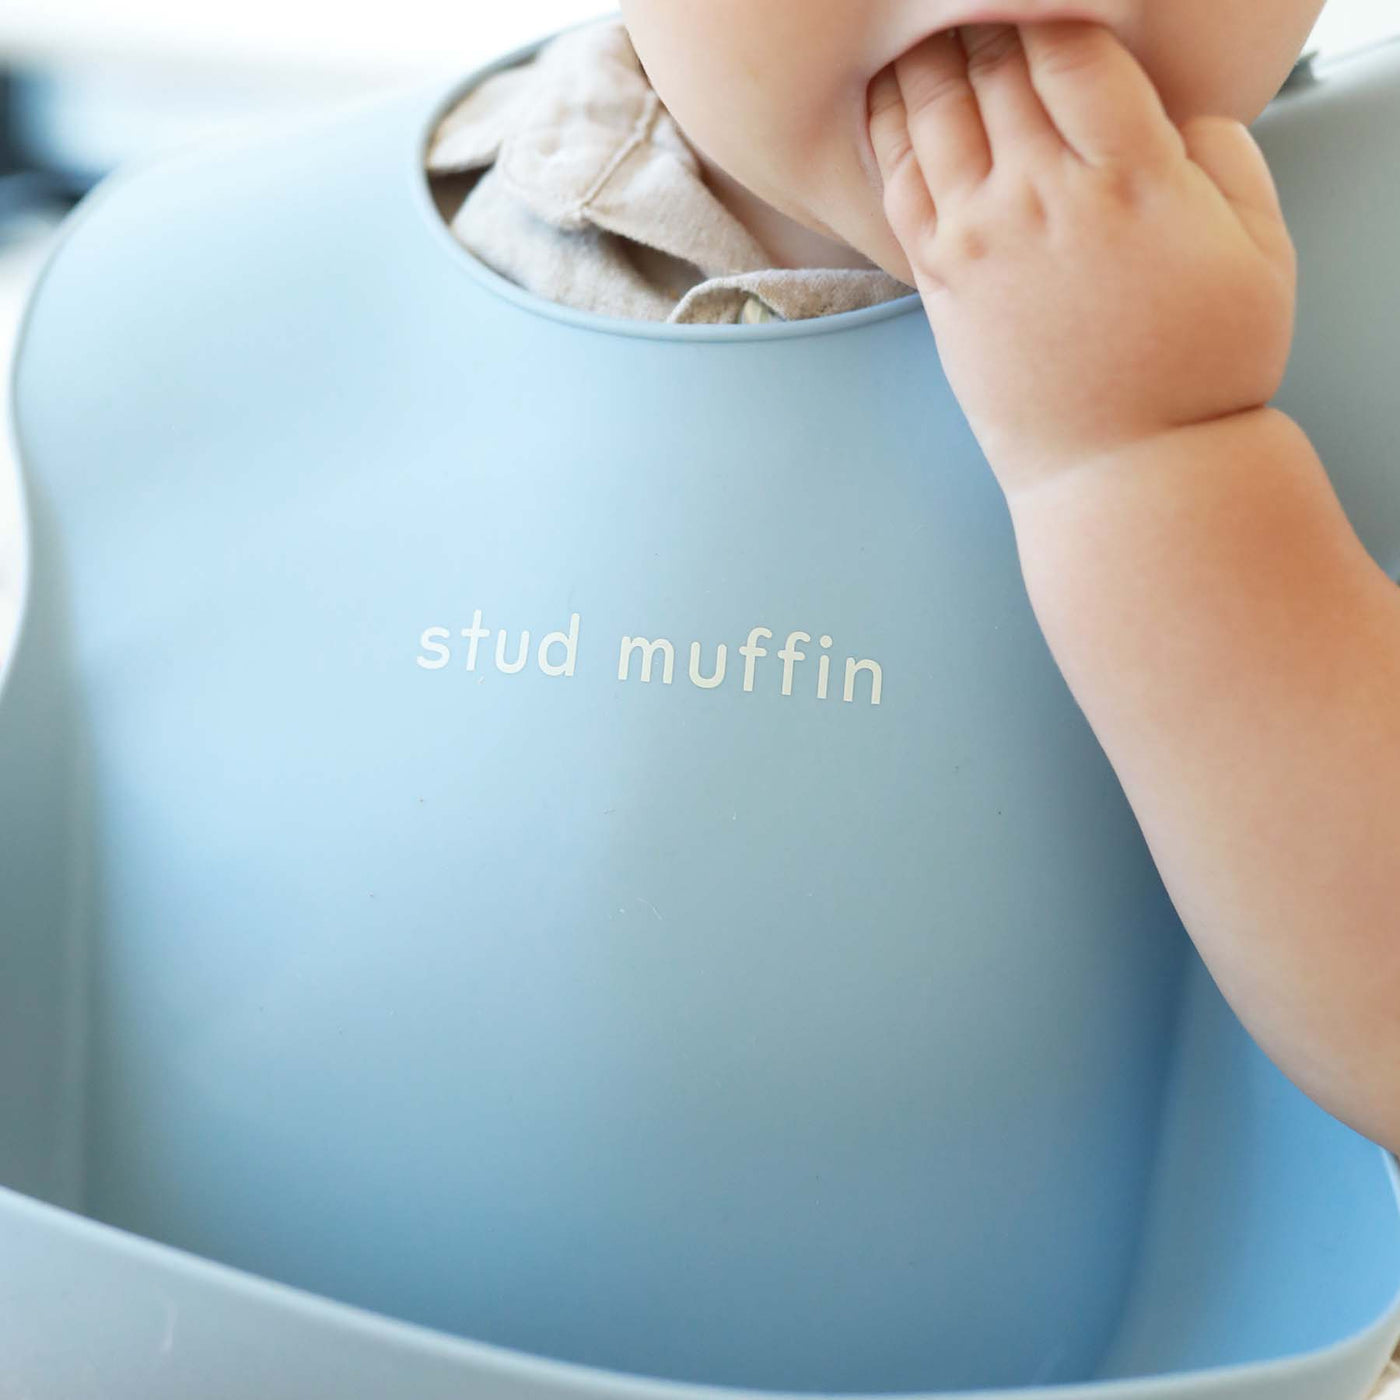 stud muffin blue baby bib made of silicone 